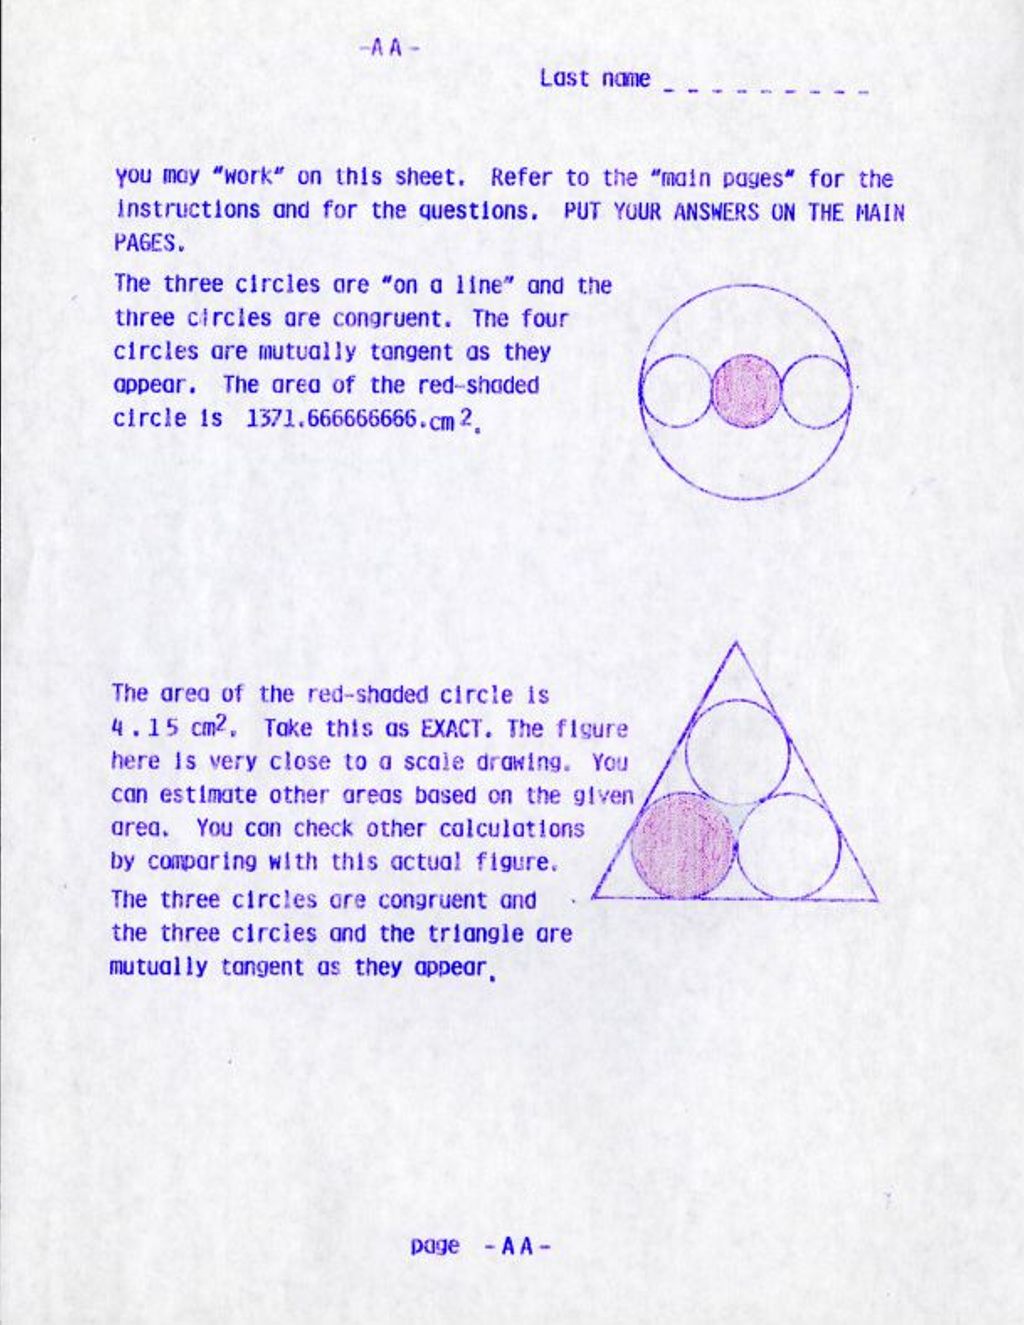 Miniature of Three Circles “on a line”, Three circles in a triangle